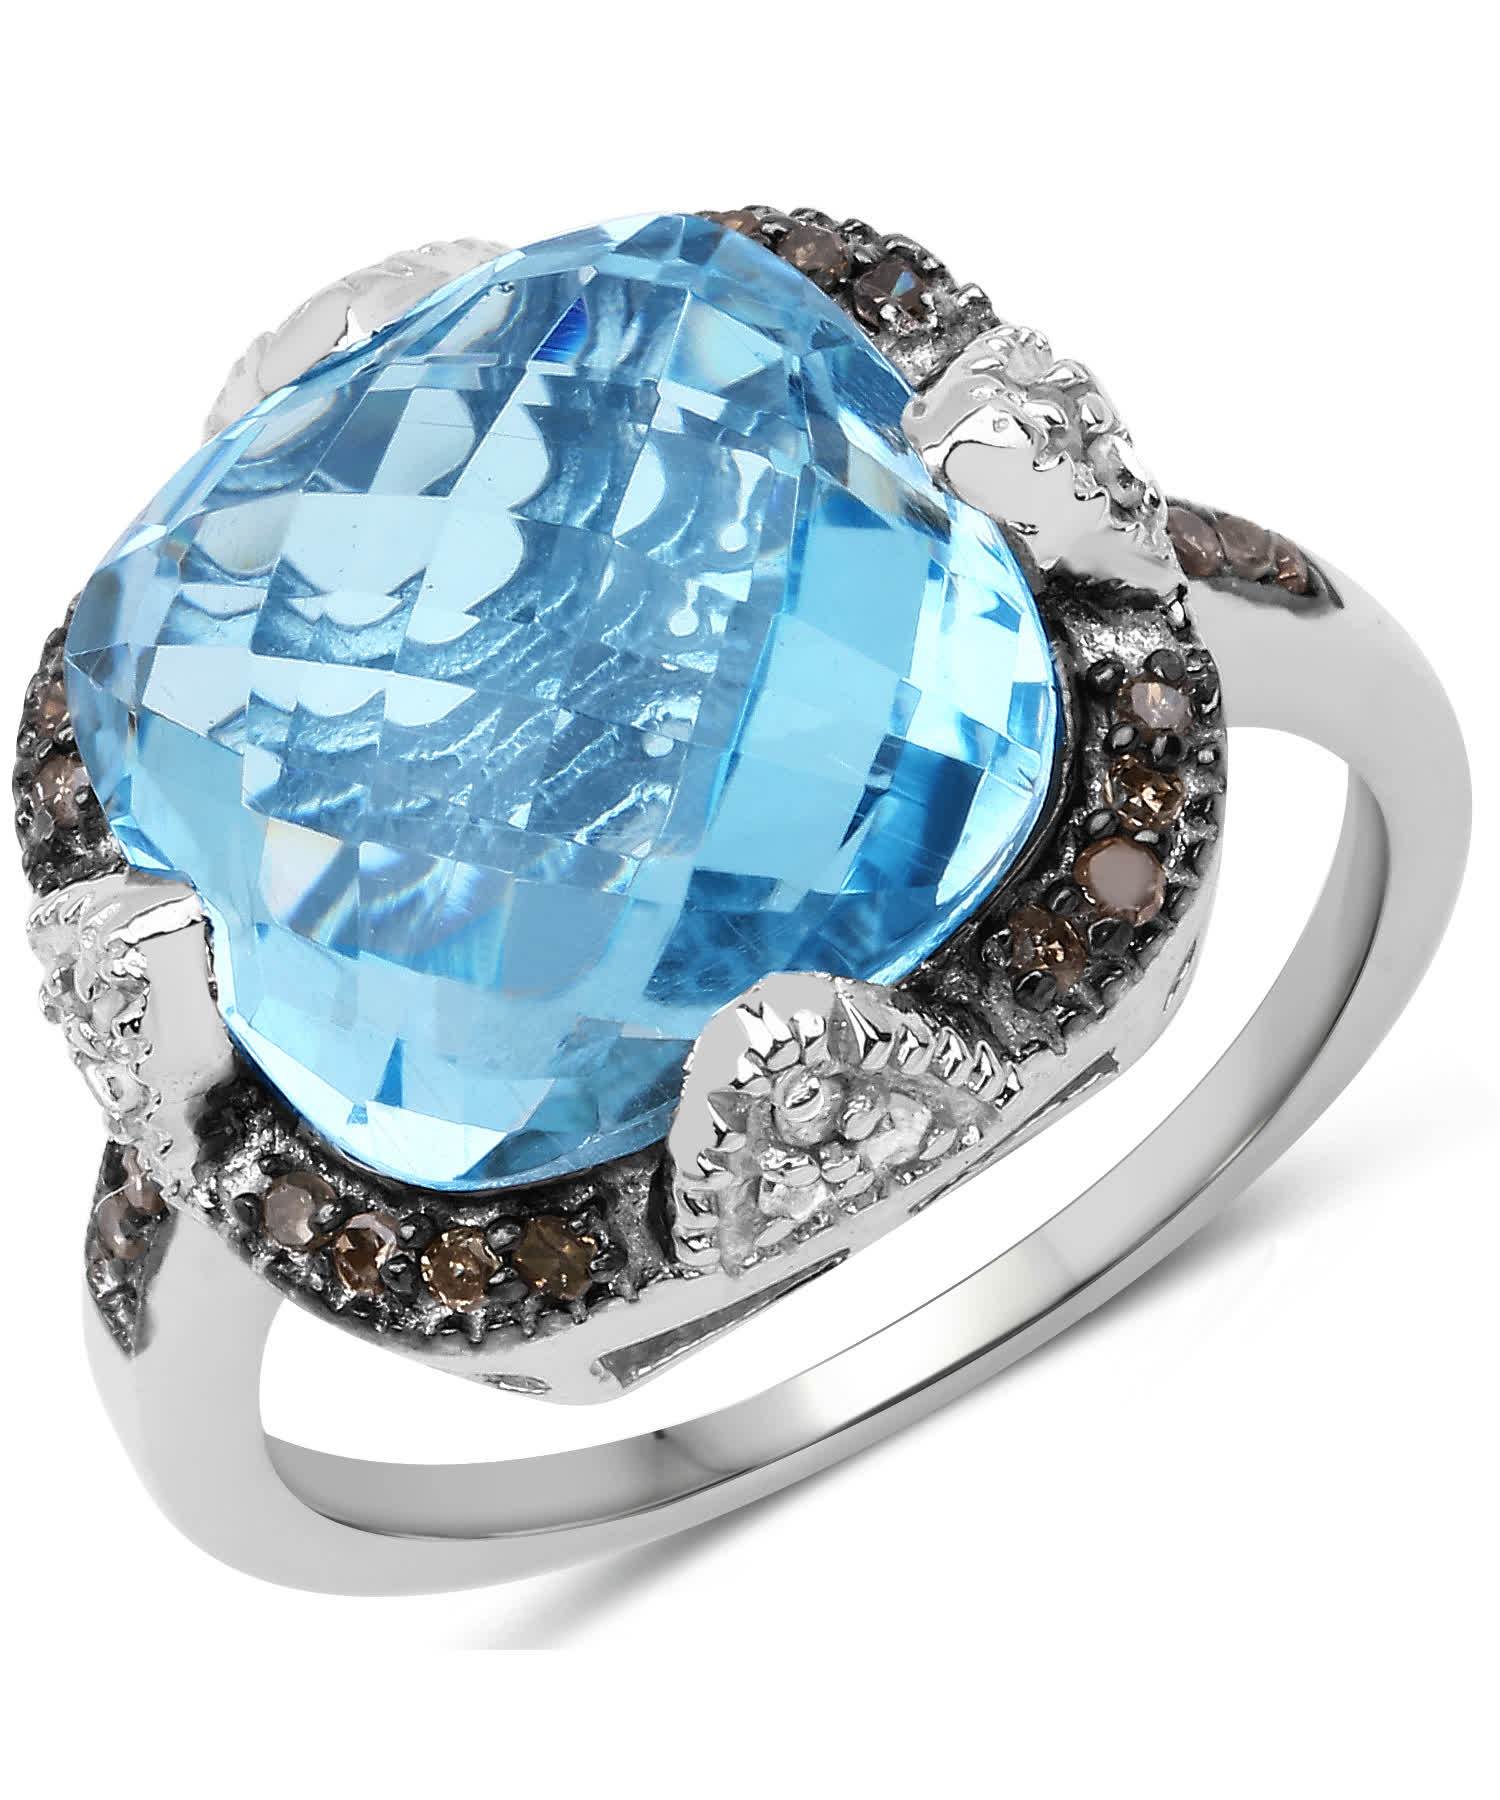 8.30ctw Natural Swiss Blue Topaz and Champagne Diamond Rhodium Plated 925 Sterling Silver Cocktail Ring View 1